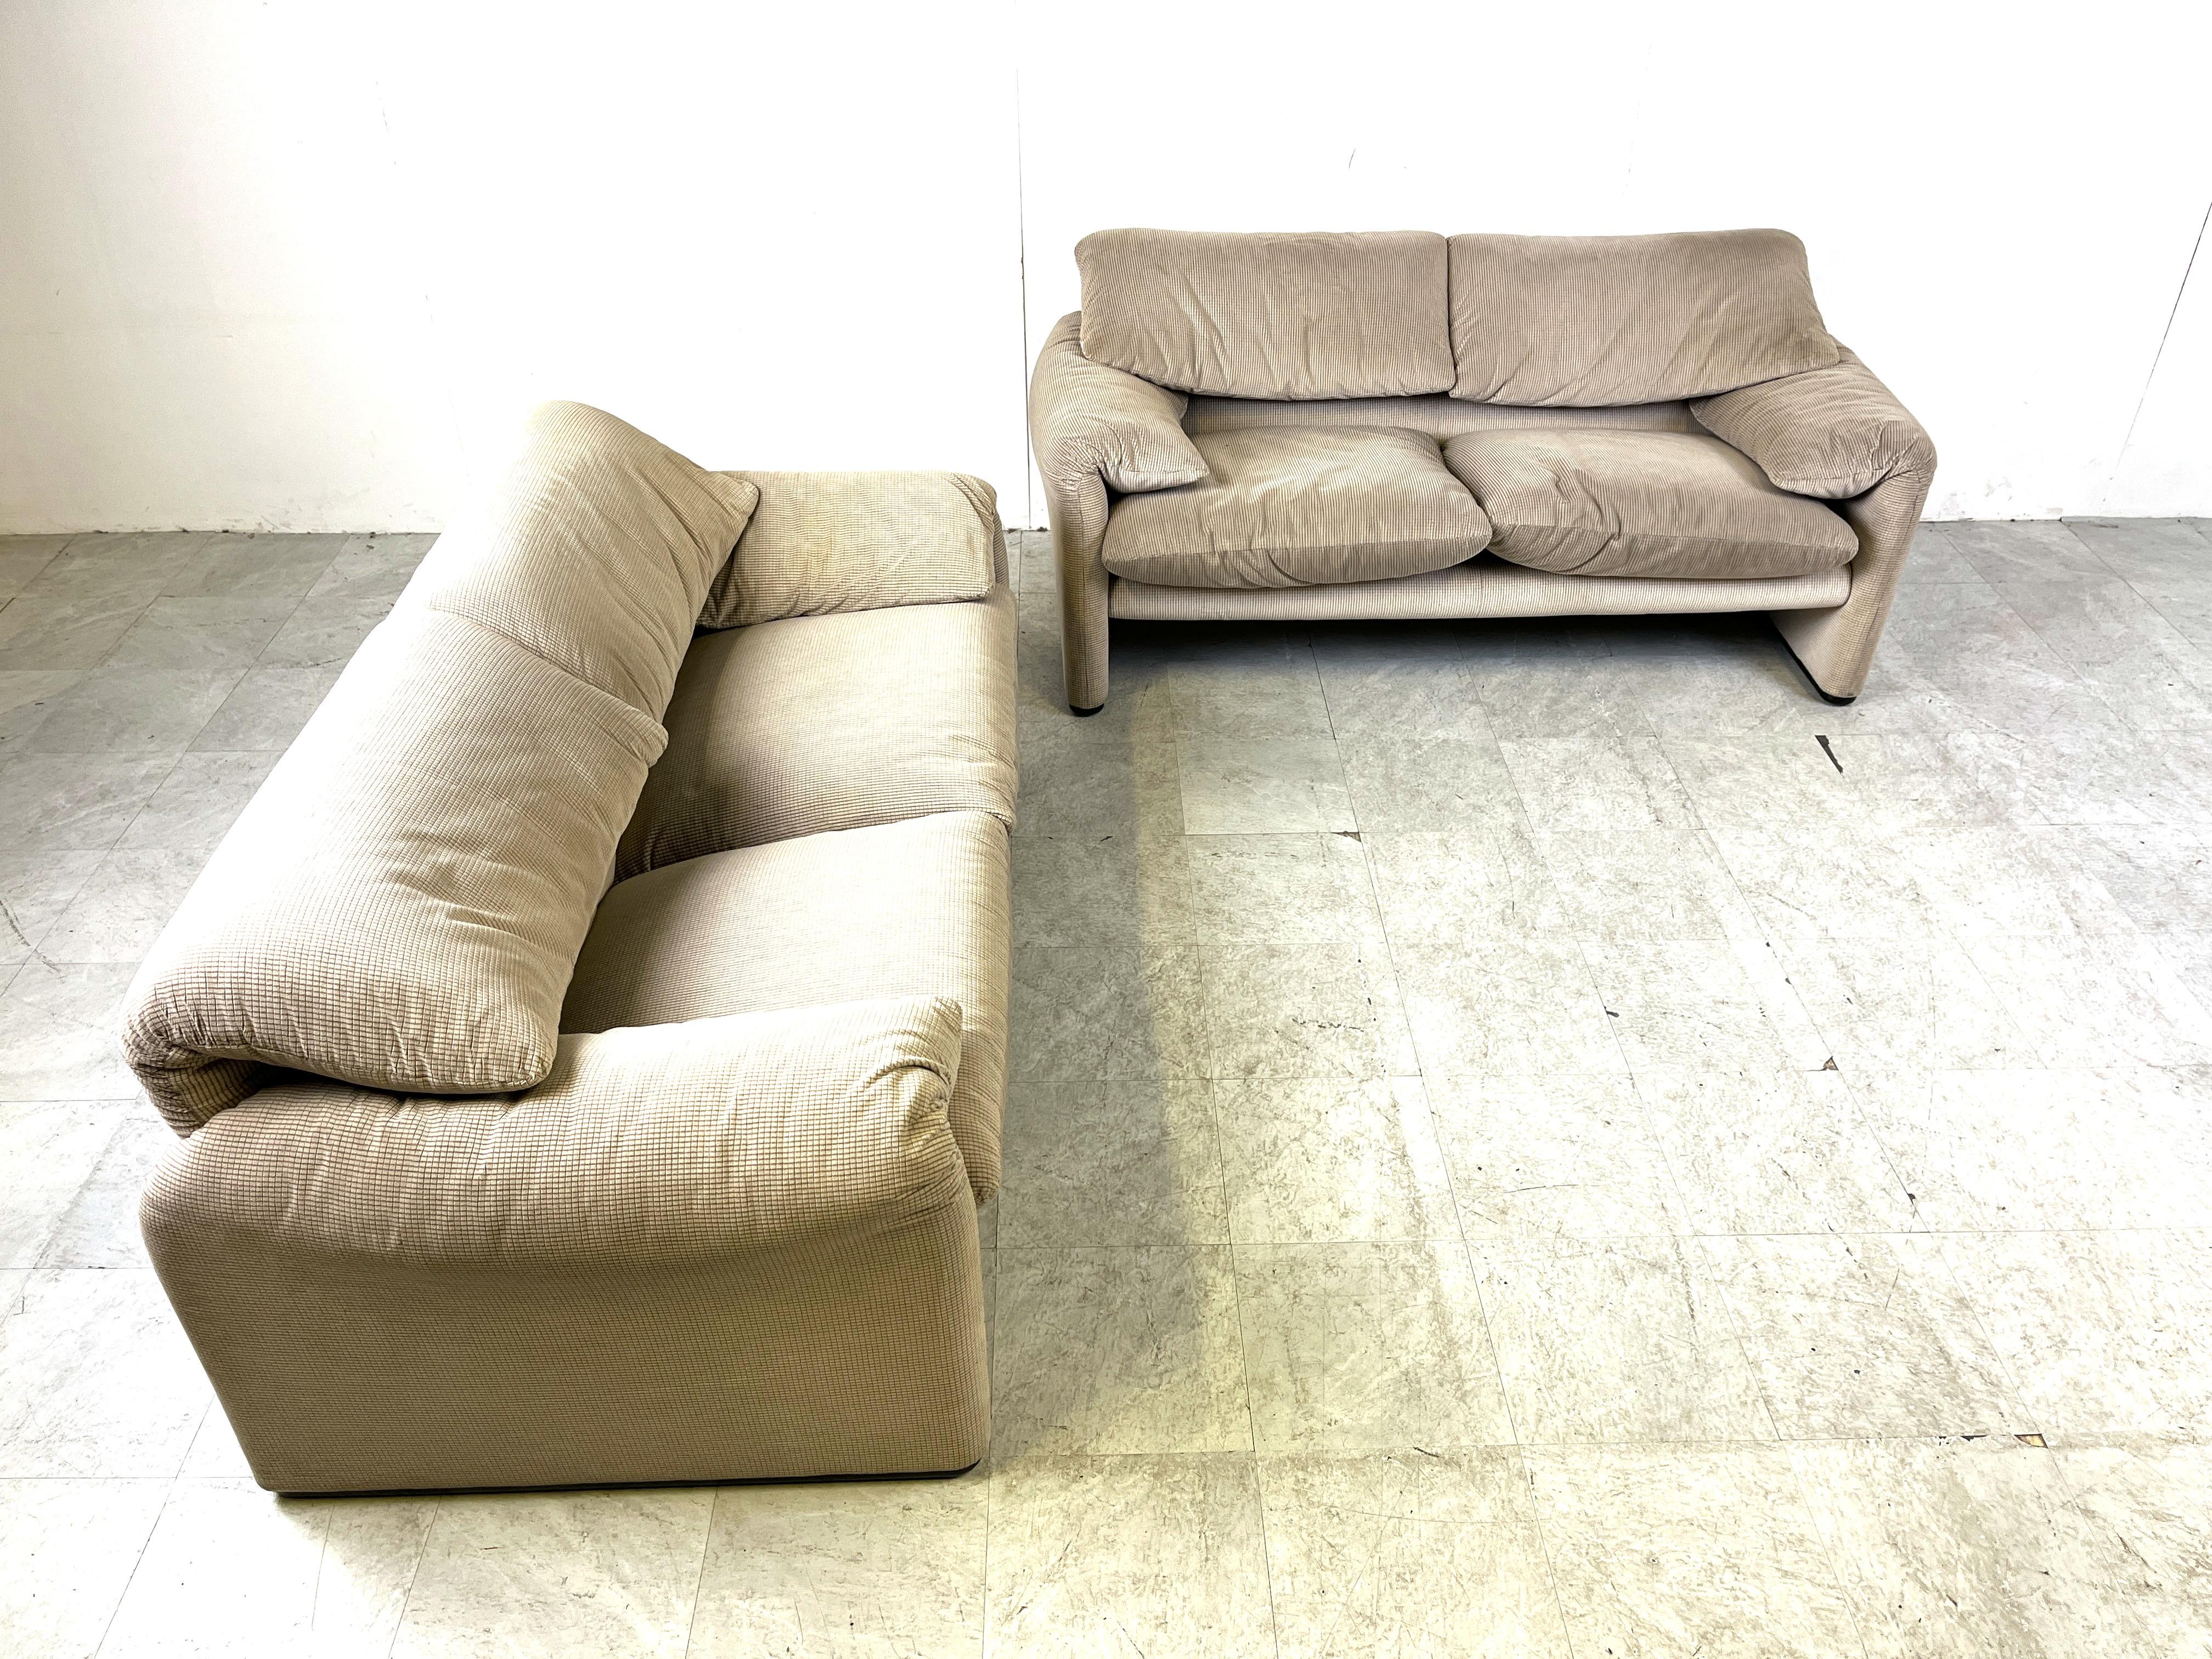 Italian Pair of Maralunga sofas by Vico Magistretti for Cassina, 1970s For Sale